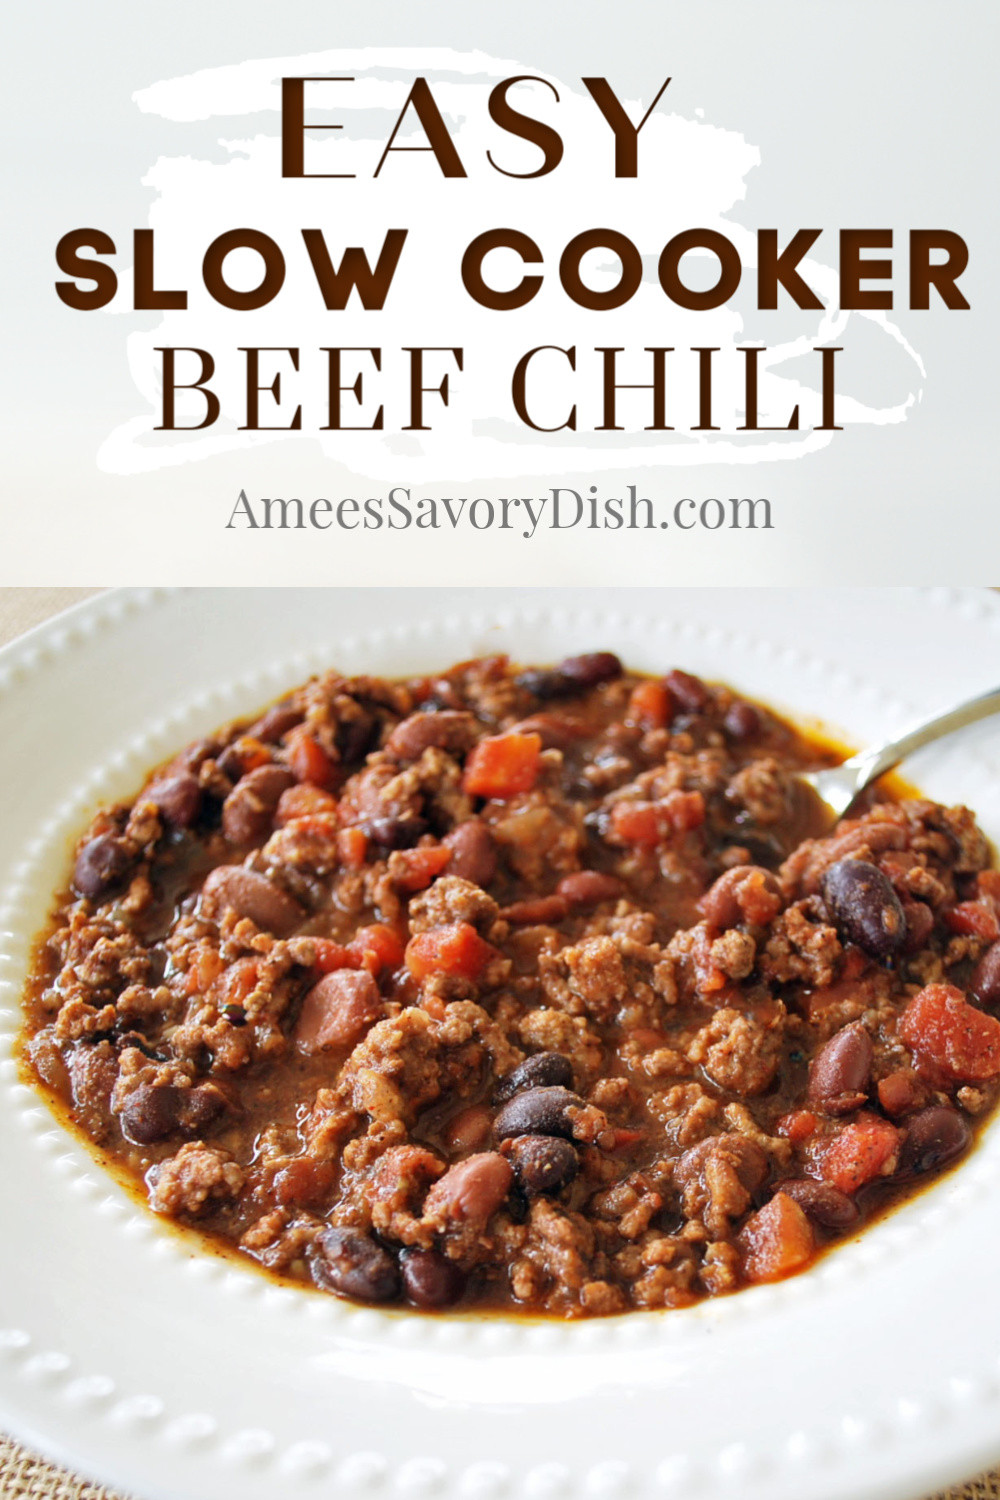 Pinto Beans And Ground Beef Recipe Slow Cooker
 Easy Slow Cooker Beef Chili Amee s Savory Dish